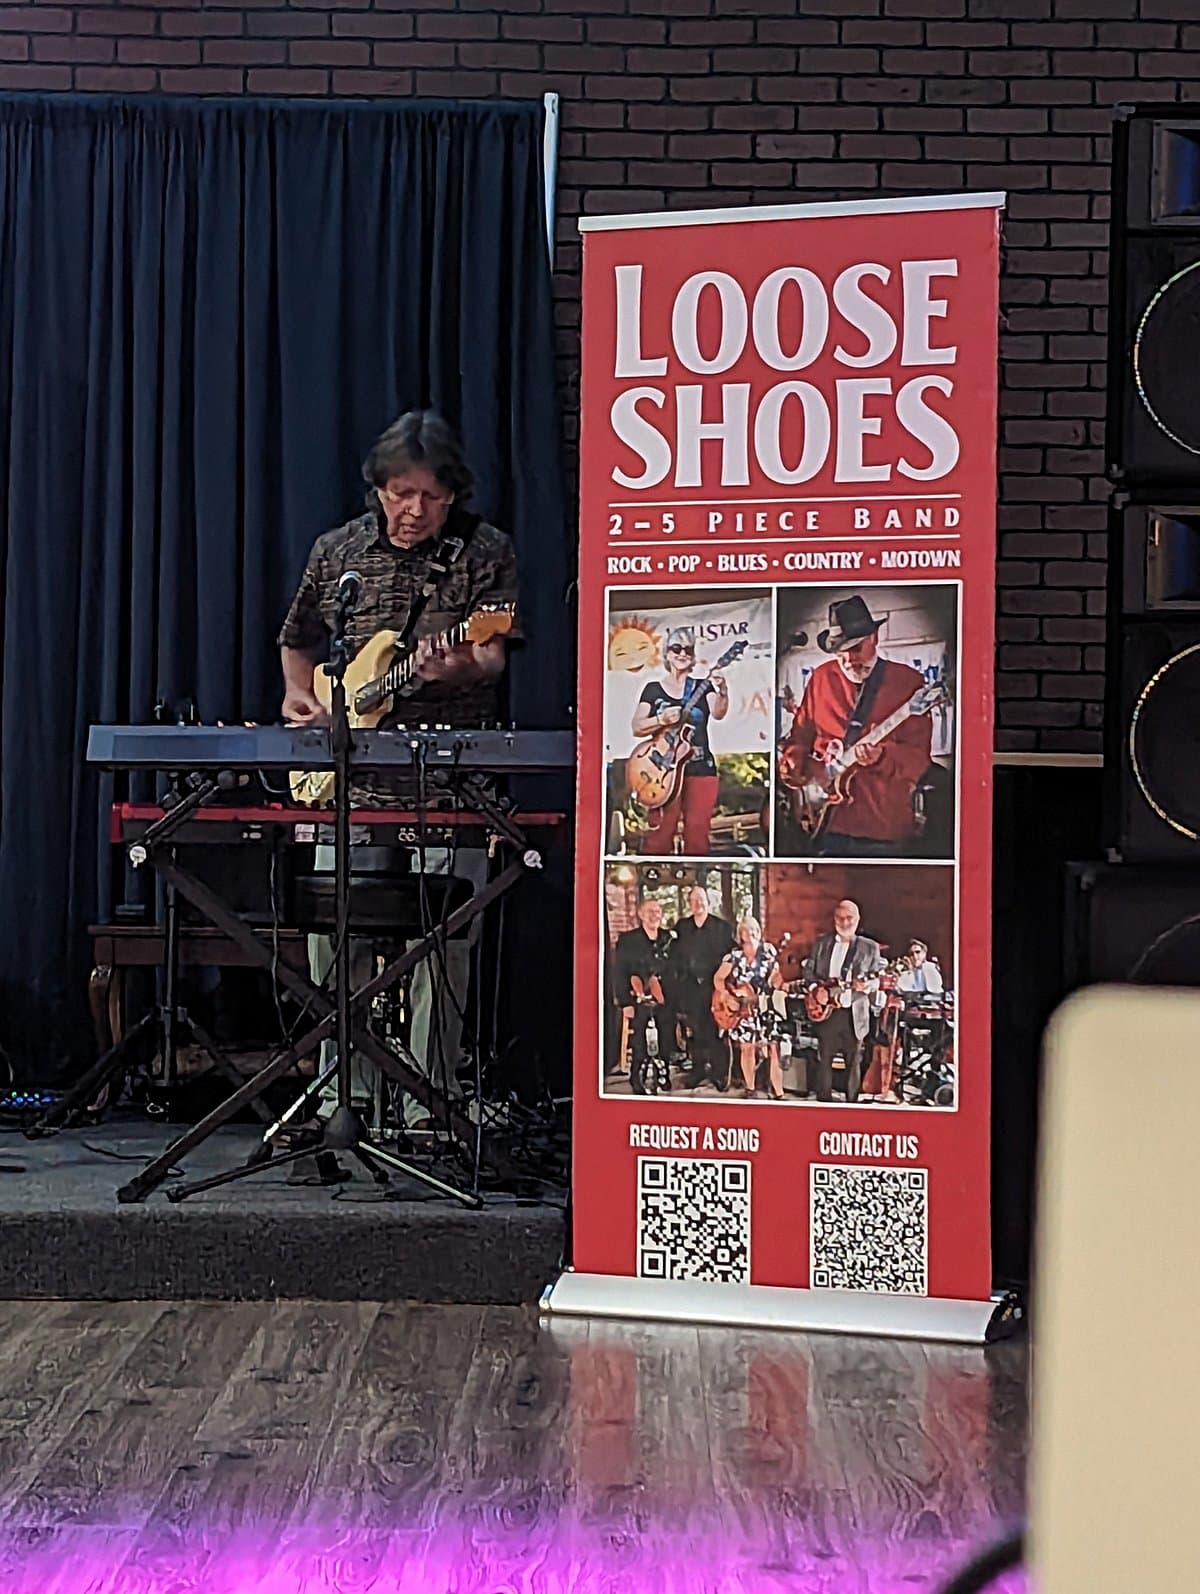 Loose Shoes Band